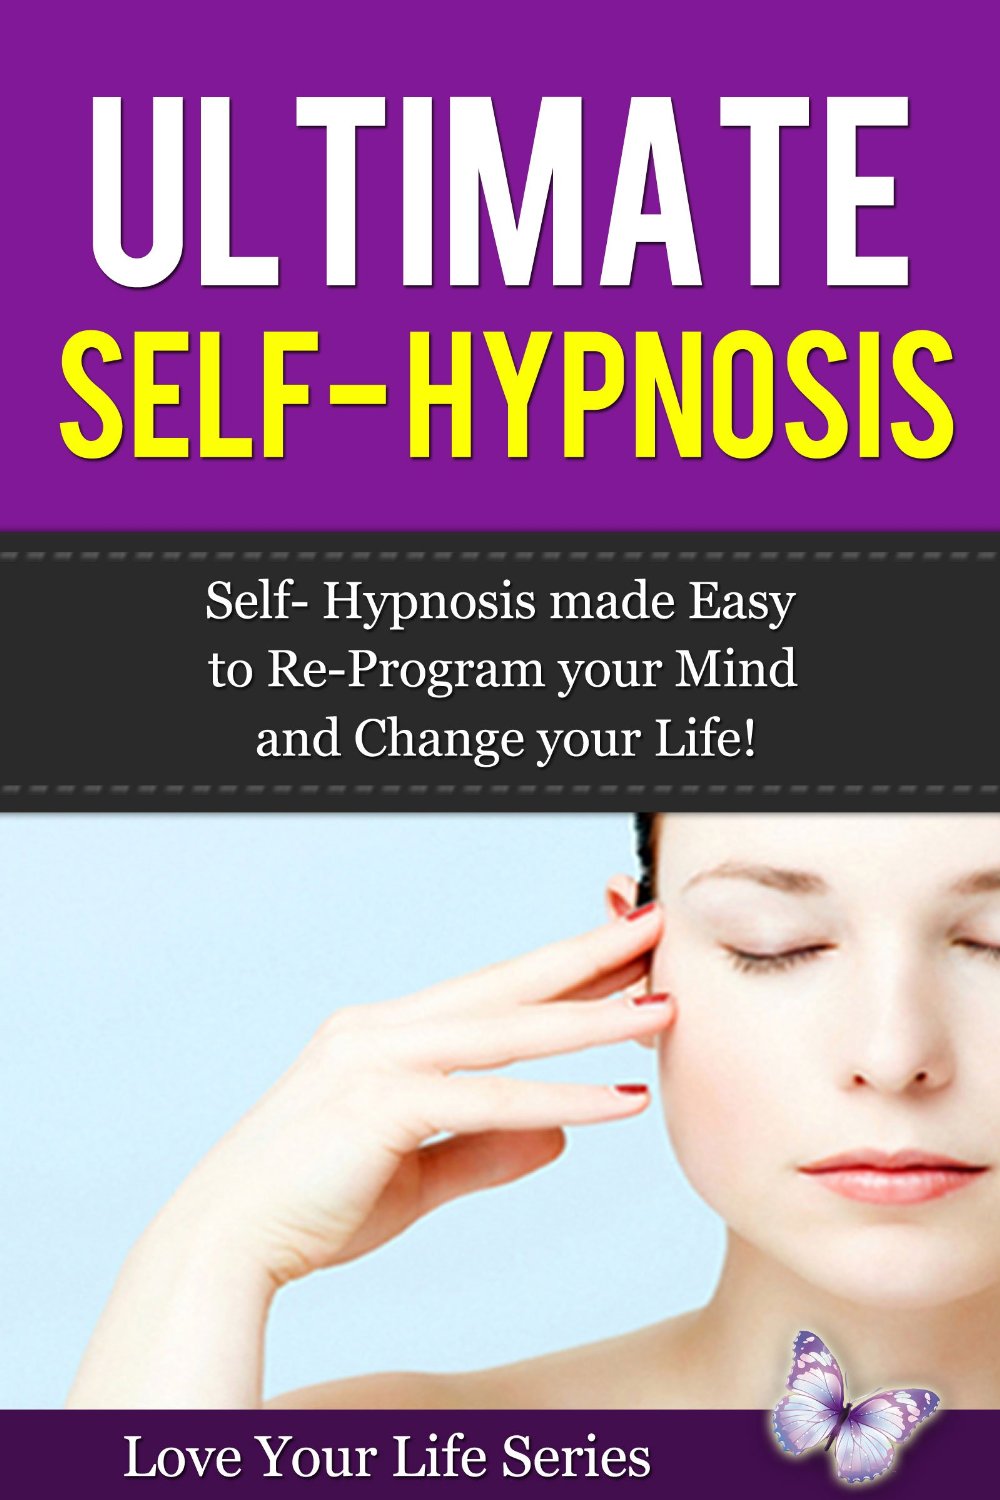 Ultimate Self- Hypnosis: Self -Hypnosis made Easy to Re-Program your Mind and Change your Life by Simone Lea